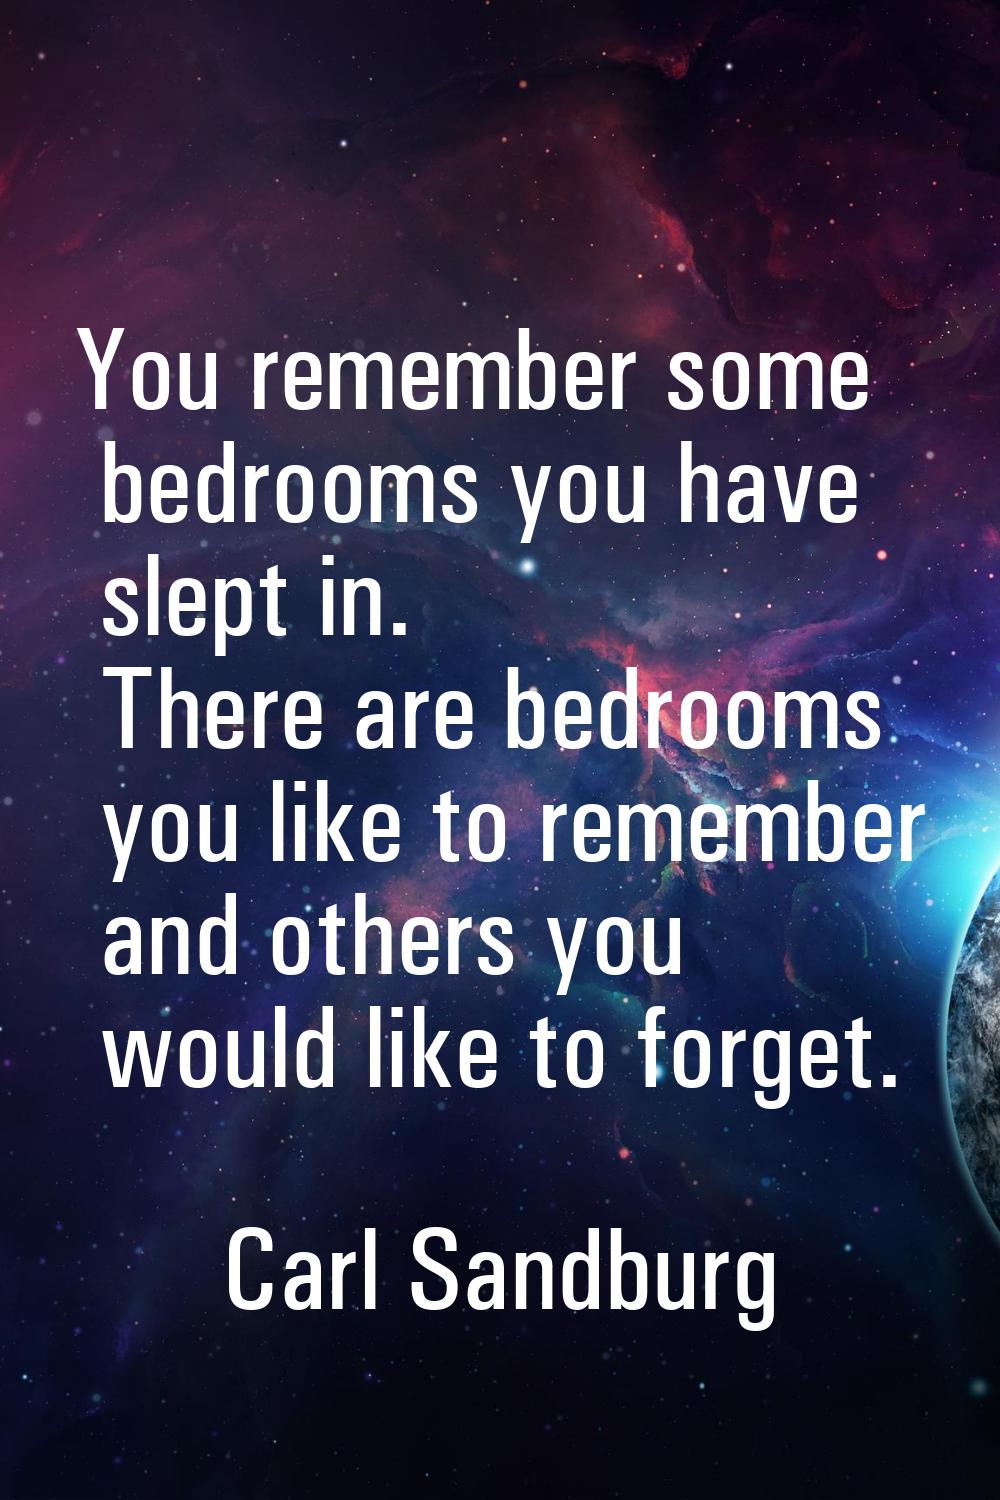 You remember some bedrooms you have slept in. There are bedrooms you like to remember and others yo